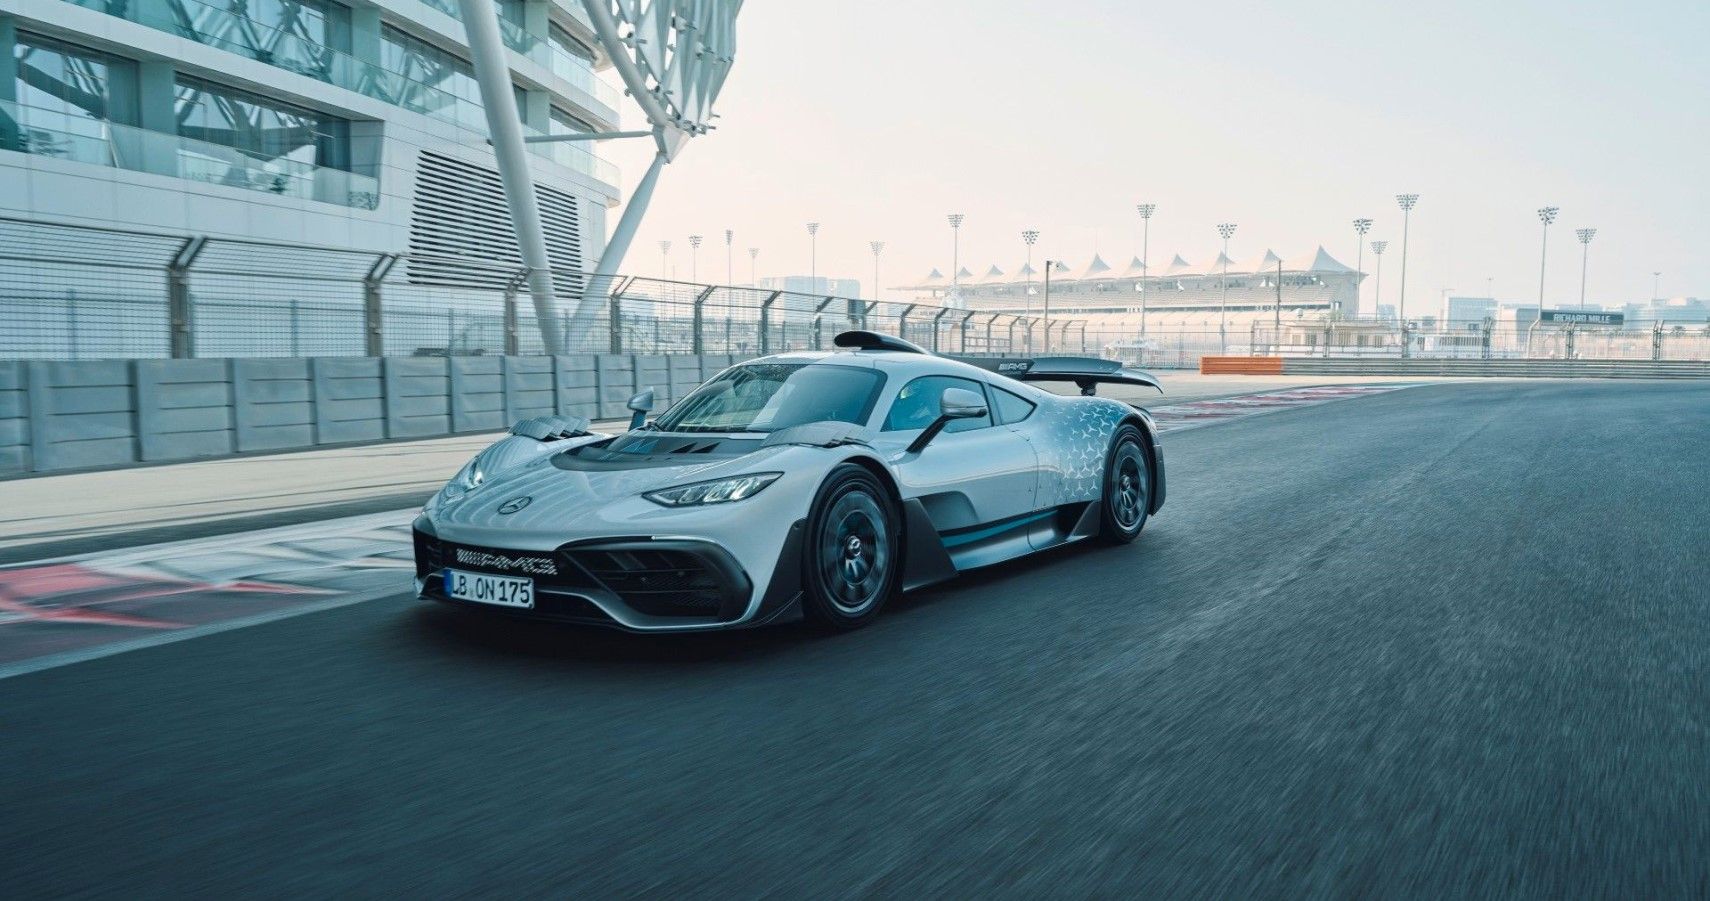 Mercedes-AMG One is a very aggresive machine